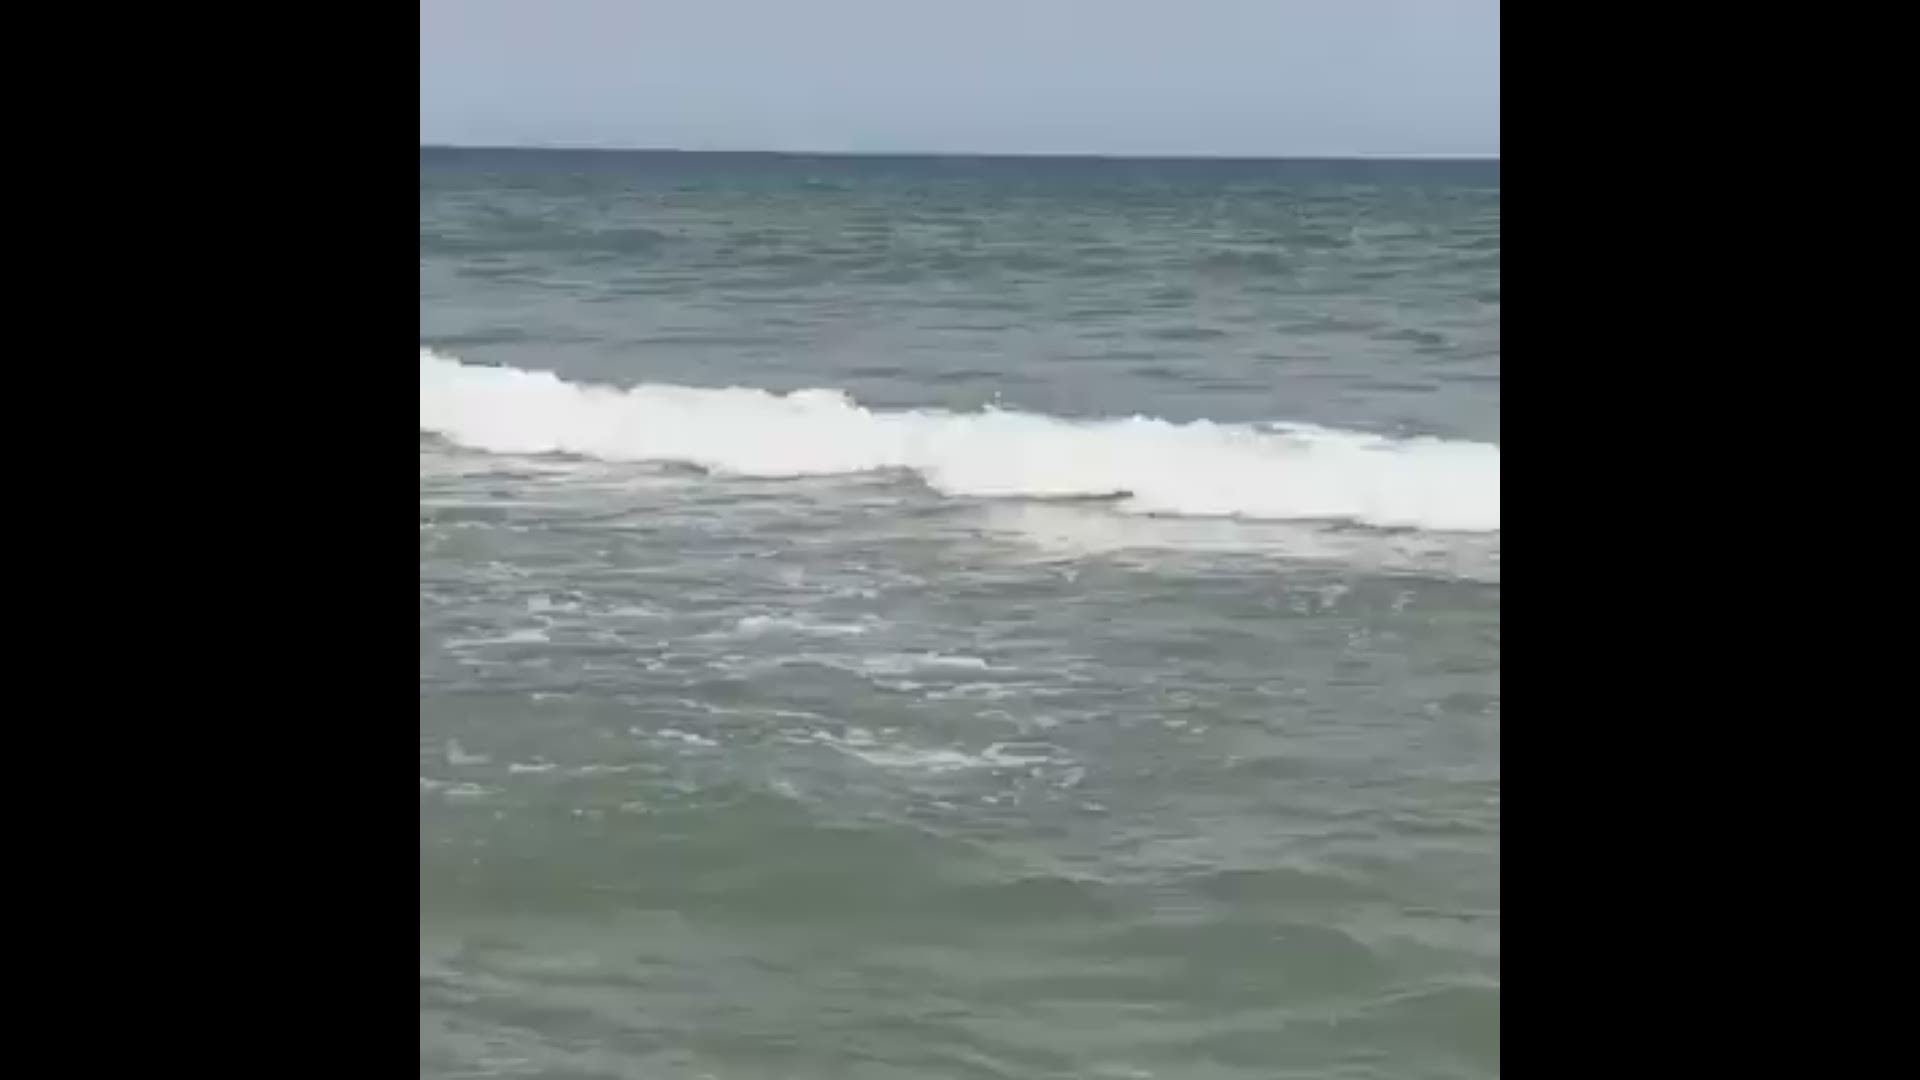 A South Carolina woman spotted a large shark just off the shore at Myrtle Beach State Park.